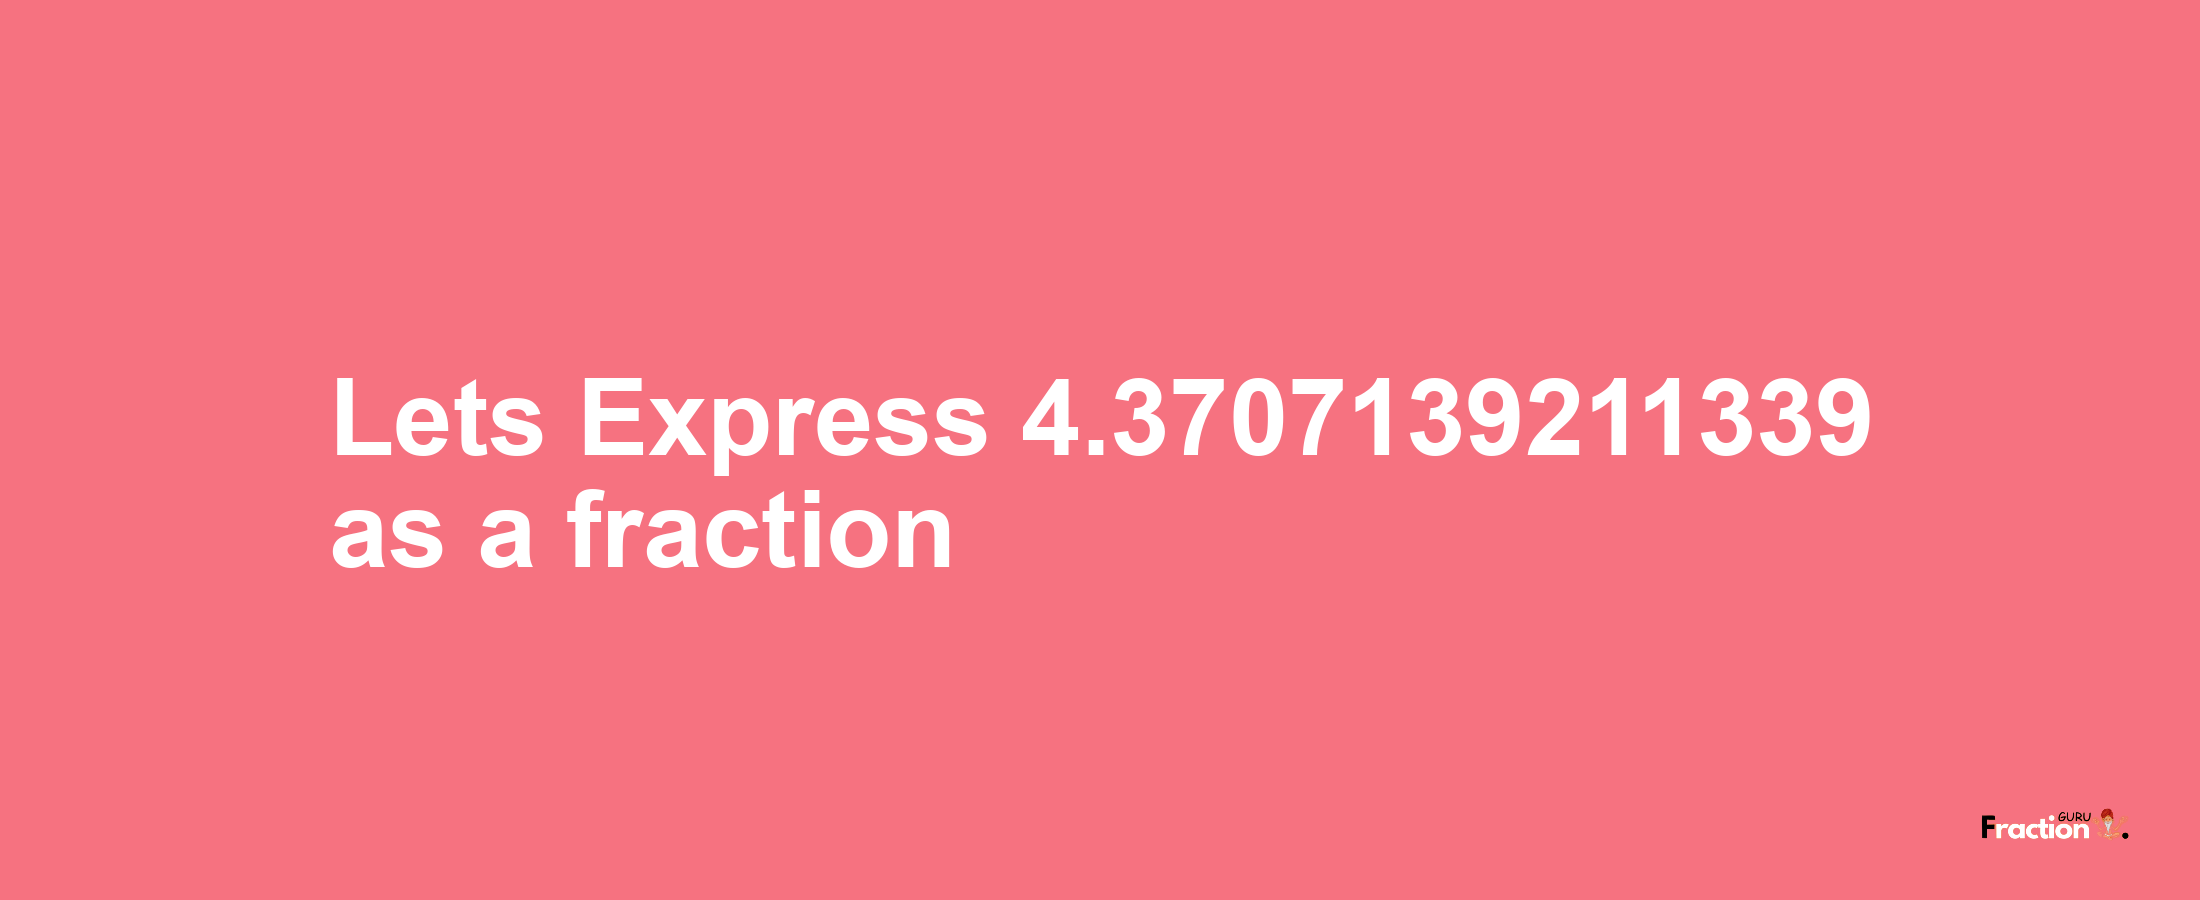 Lets Express 4.3707139211339 as afraction